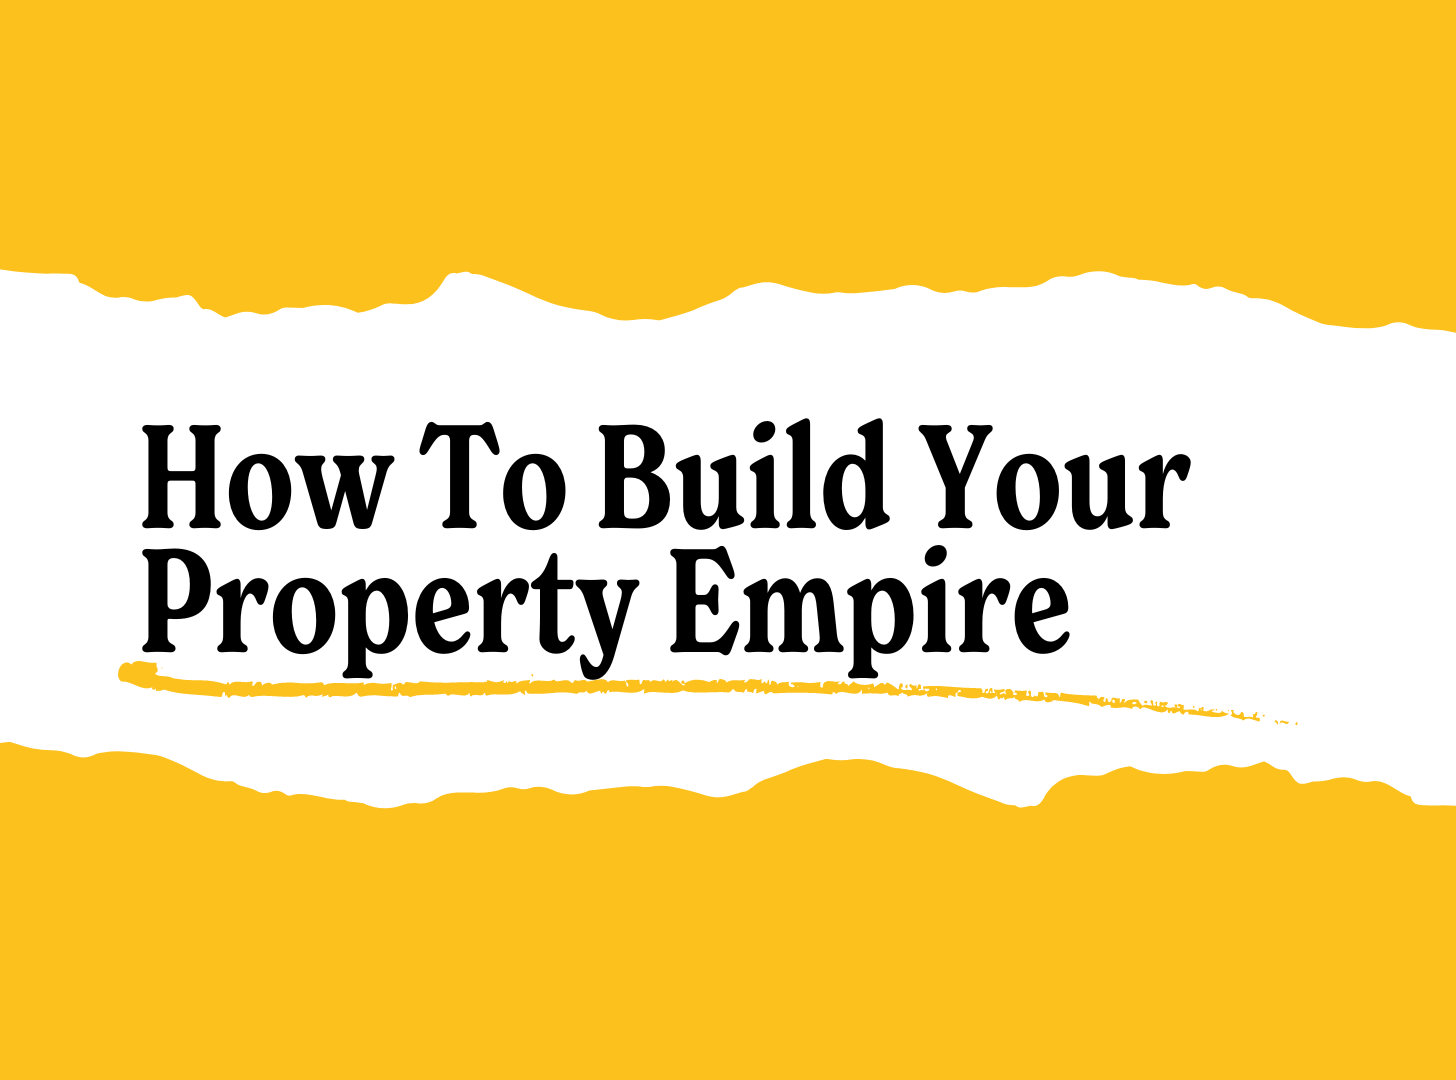 How To Build Your Property Empire